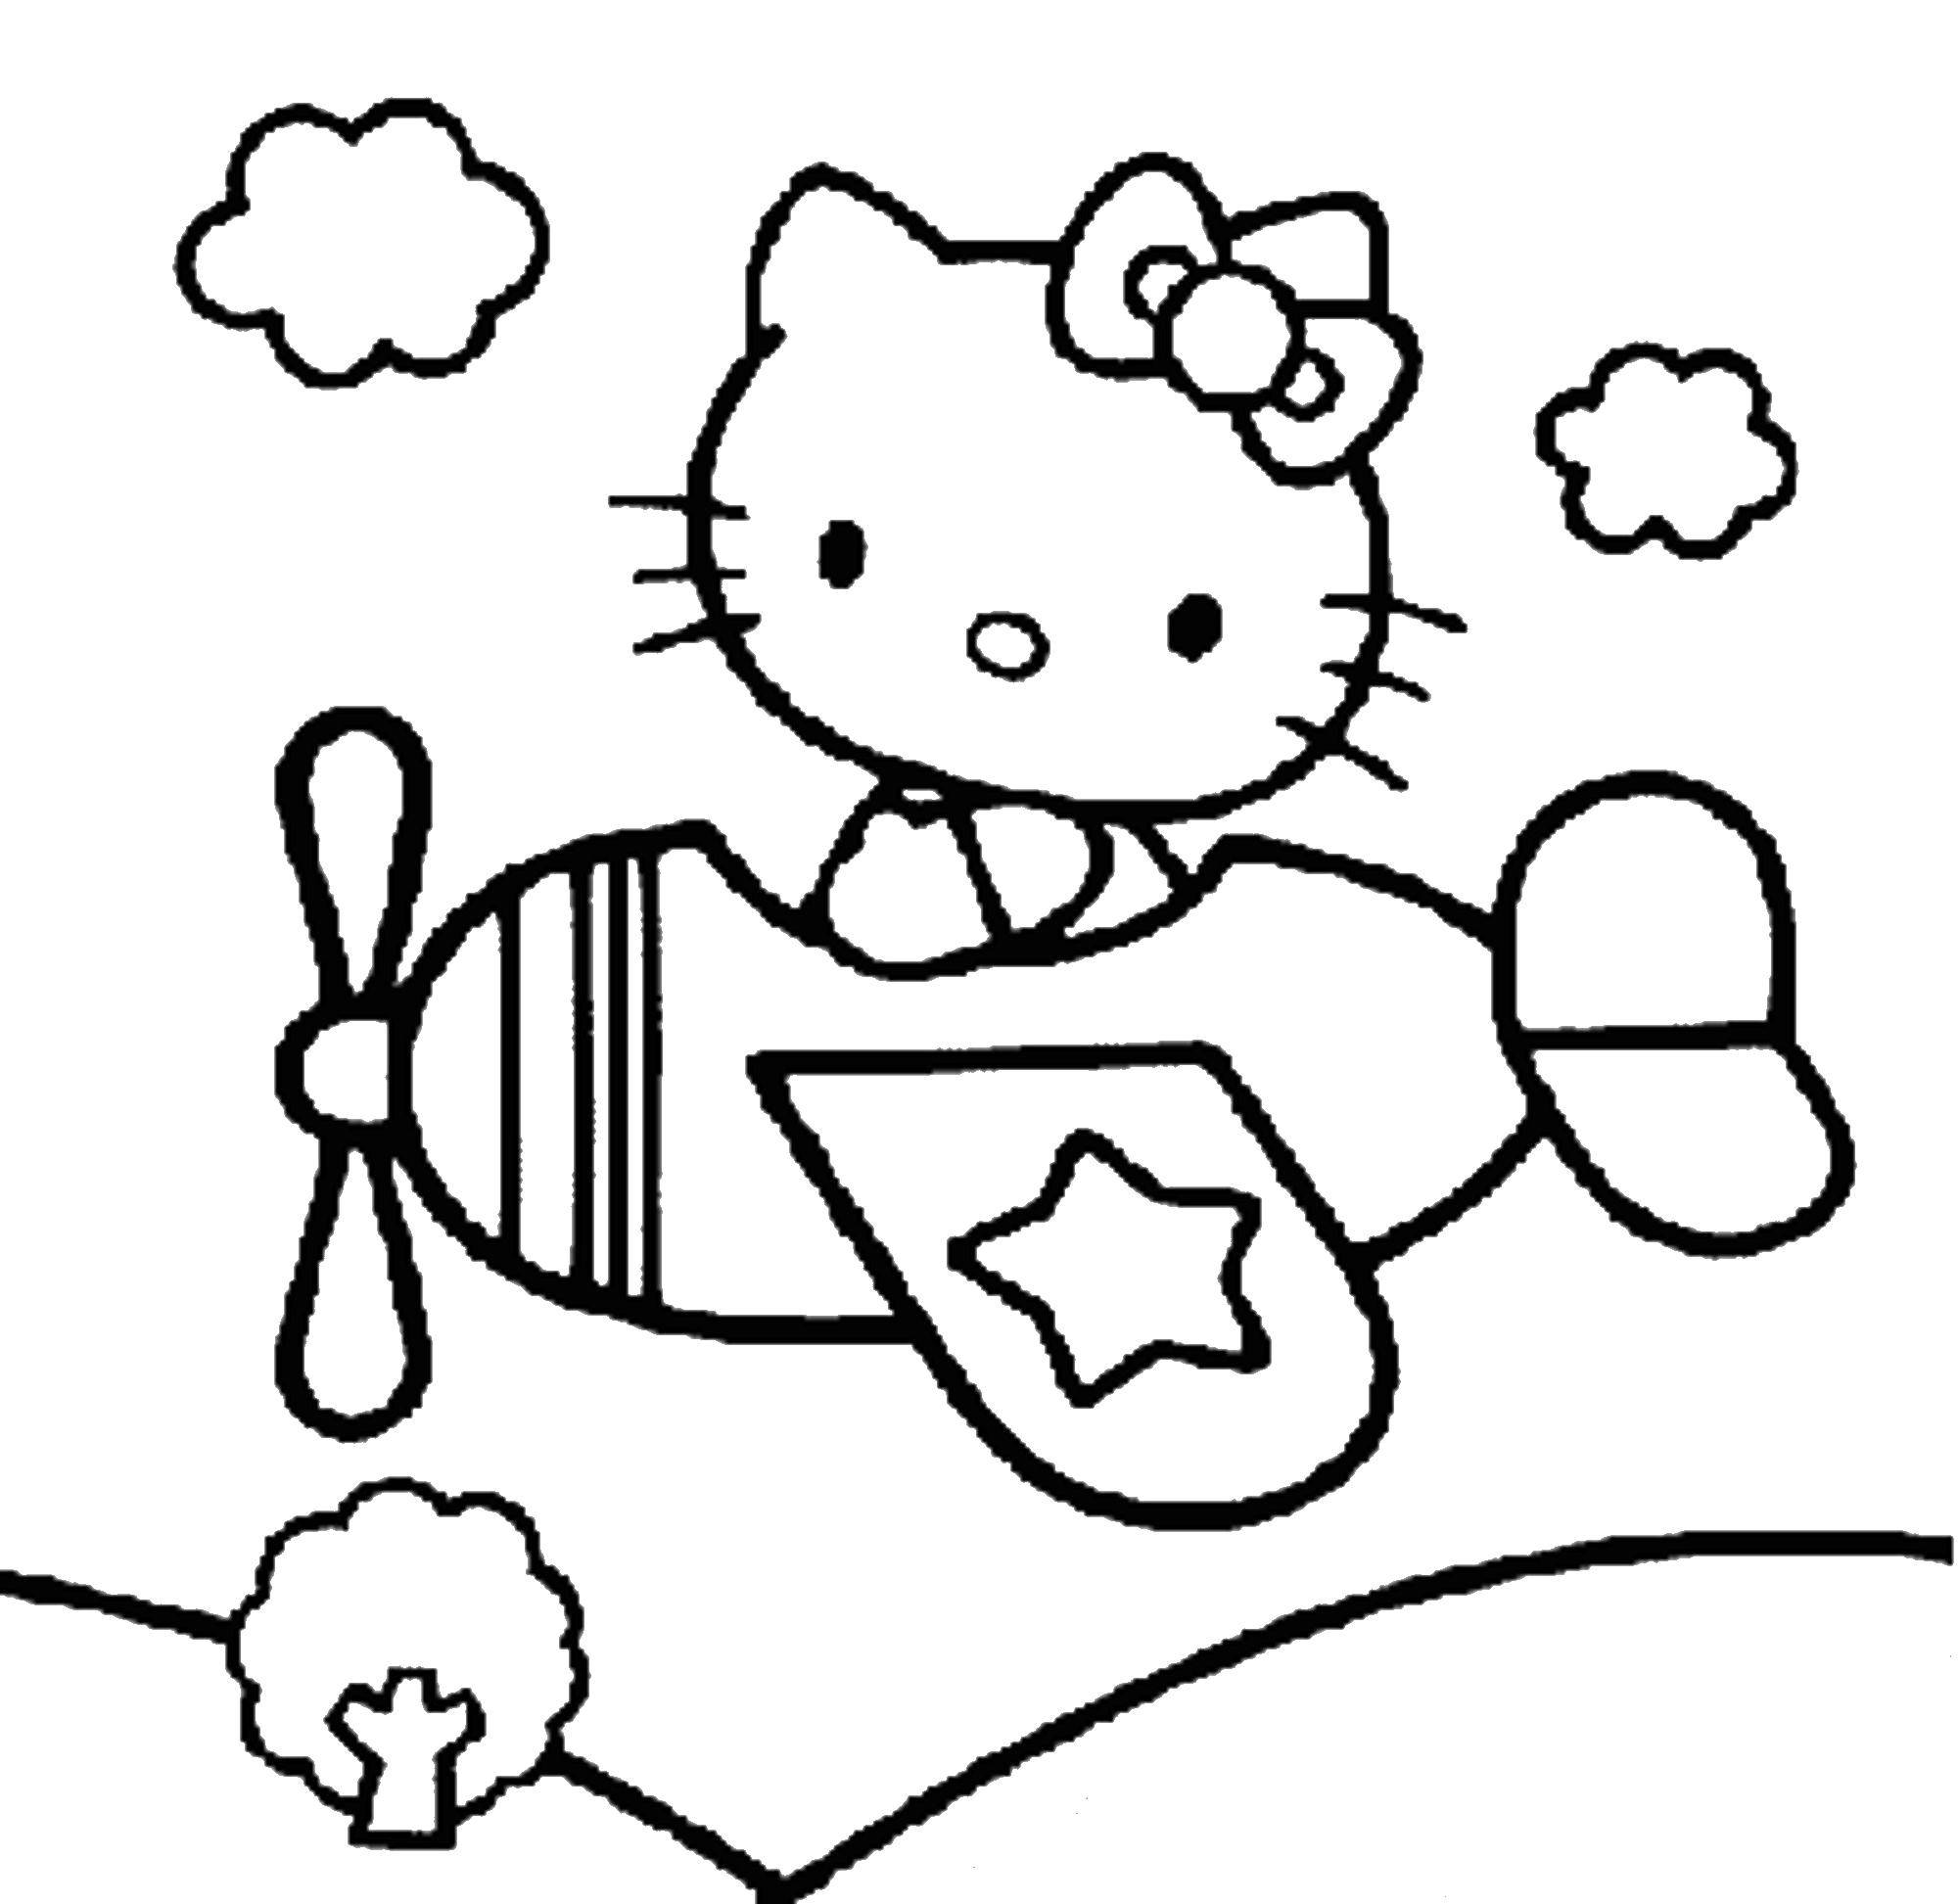 Coloring Kitty flying on the plane. Category Hello Kitty. Tags:  Kitty, Airplane.